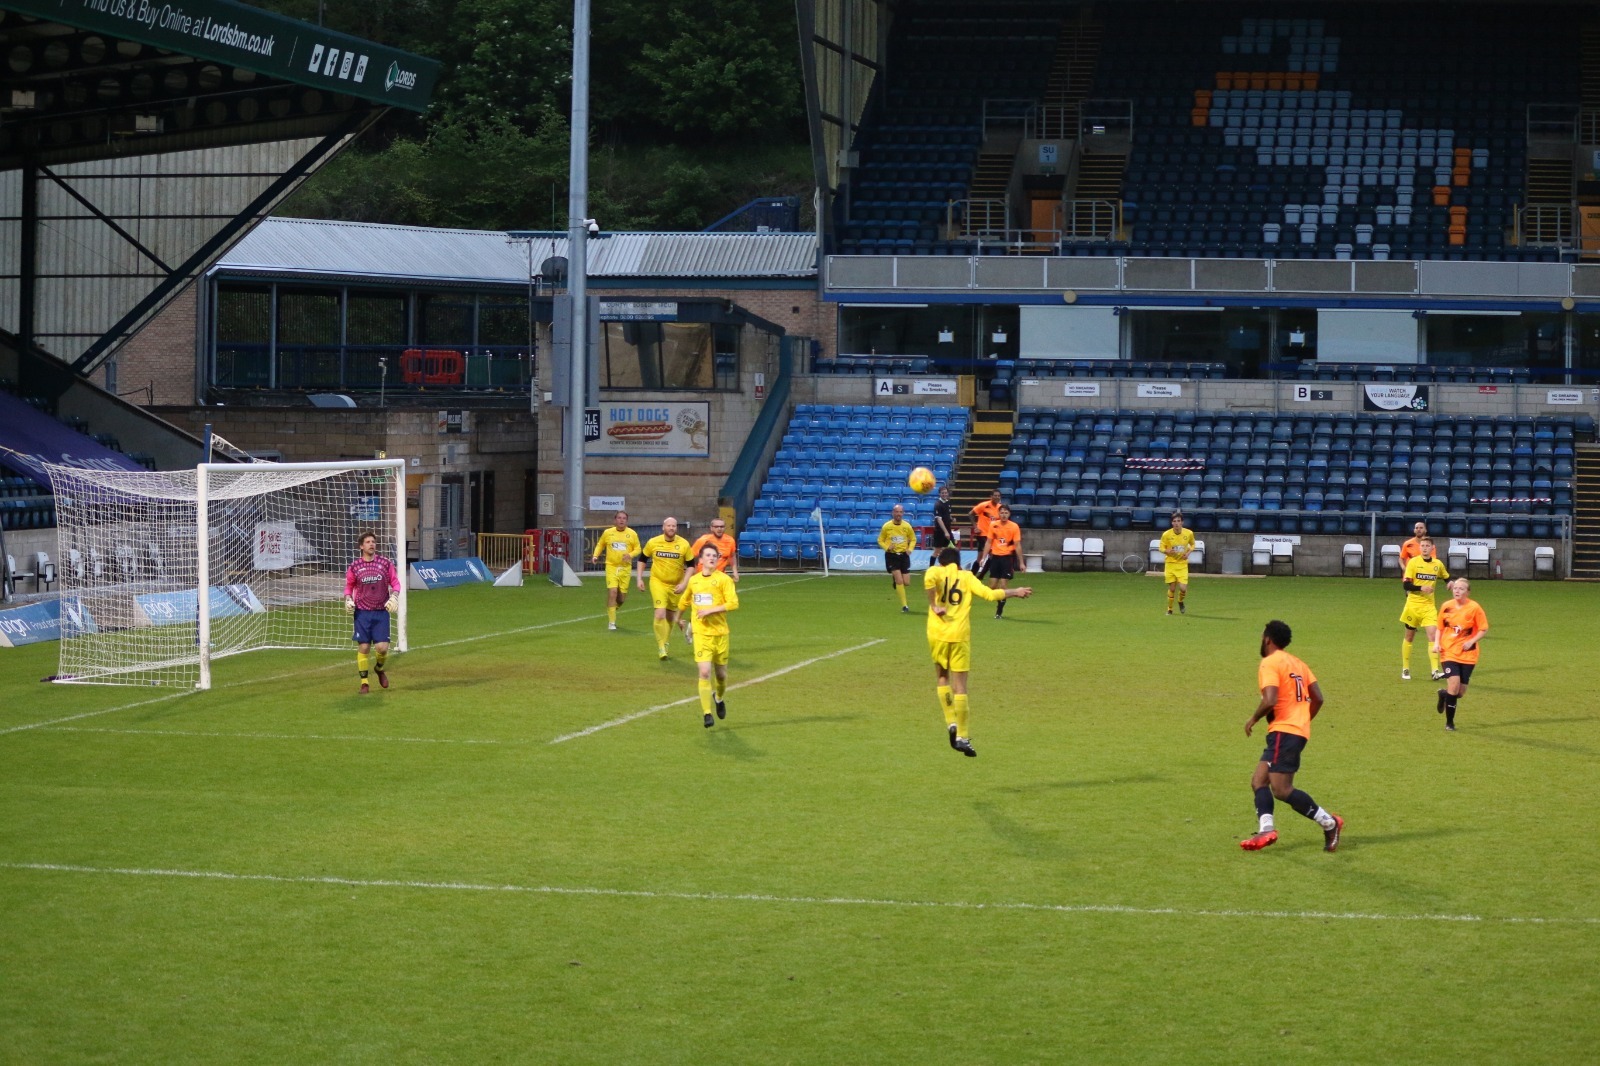 The match took place at Adams Park (Photo by Sarah Hussain)